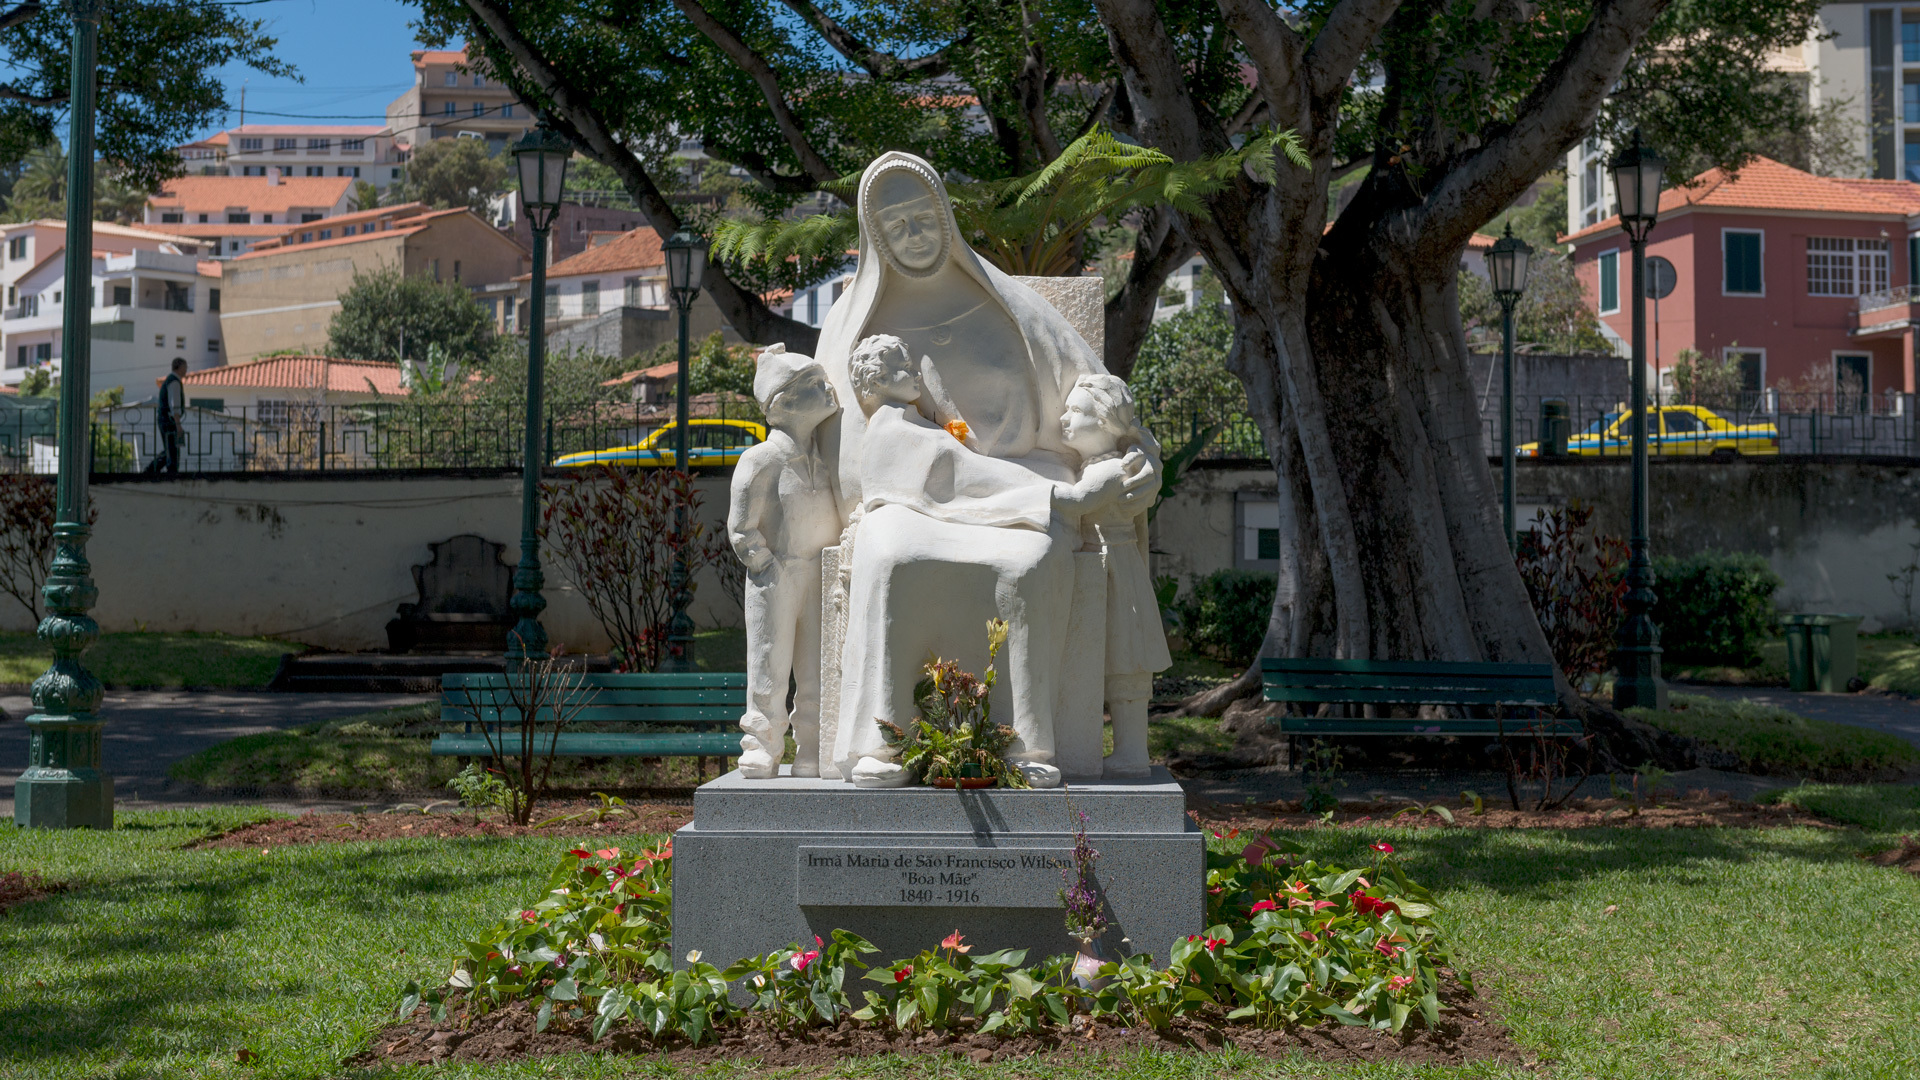 Sculpture of Sister Mary Jane Wilson 1